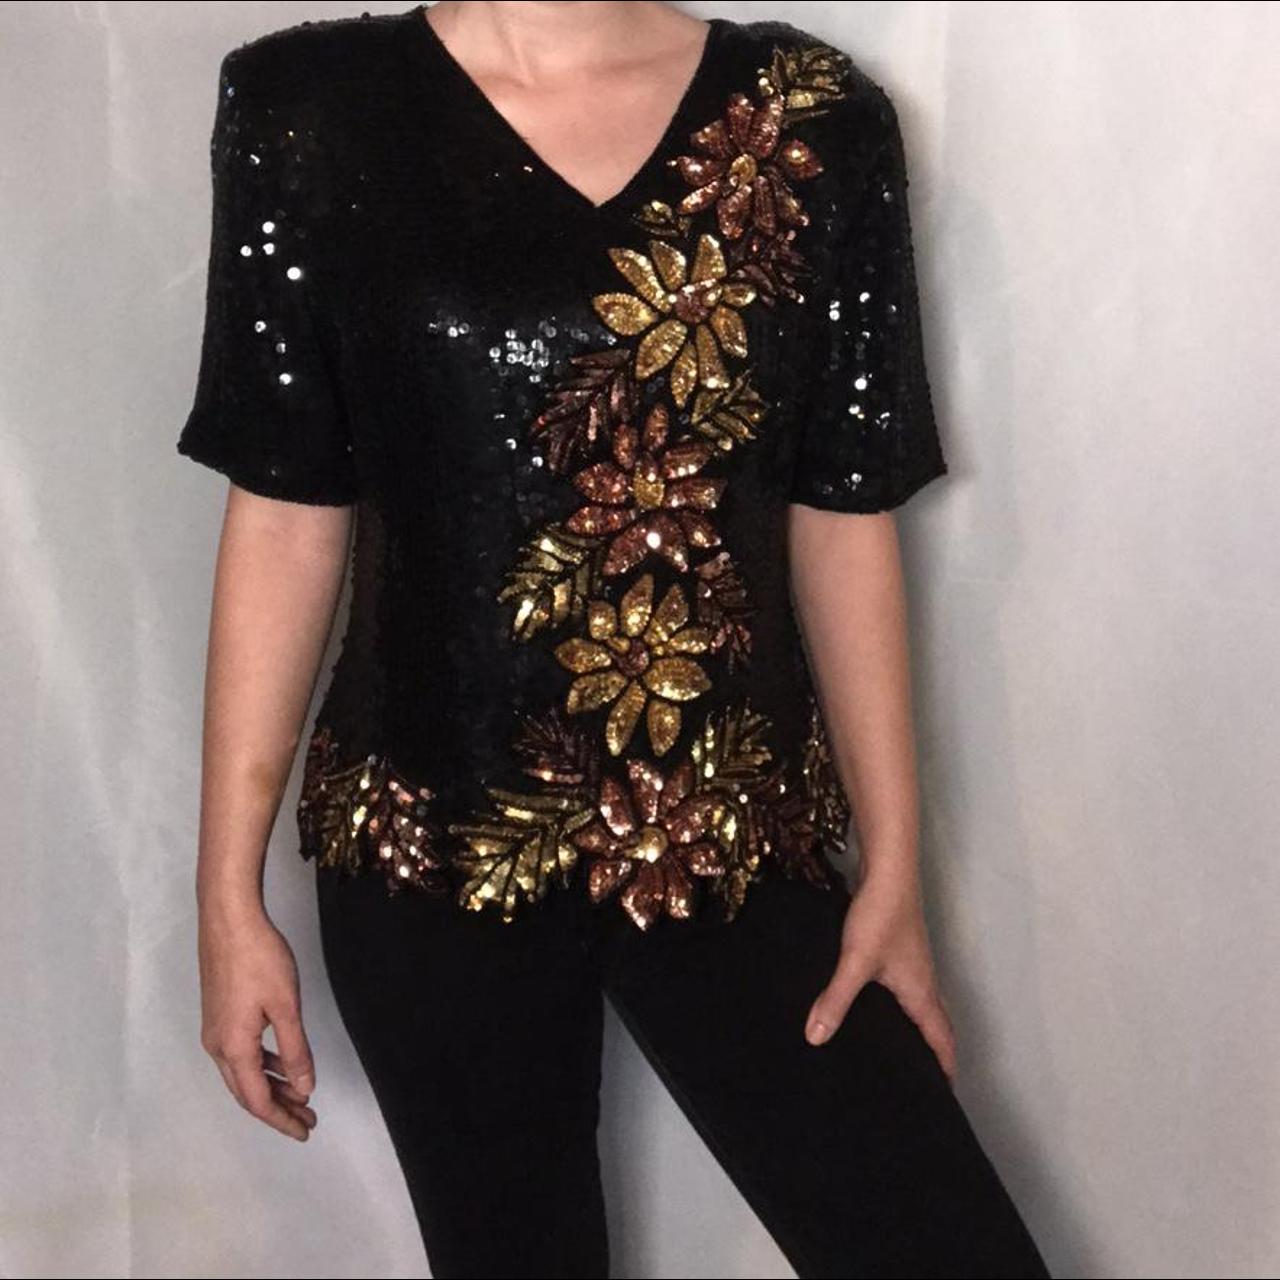 American Vintage Women's Black and Gold Top (2)